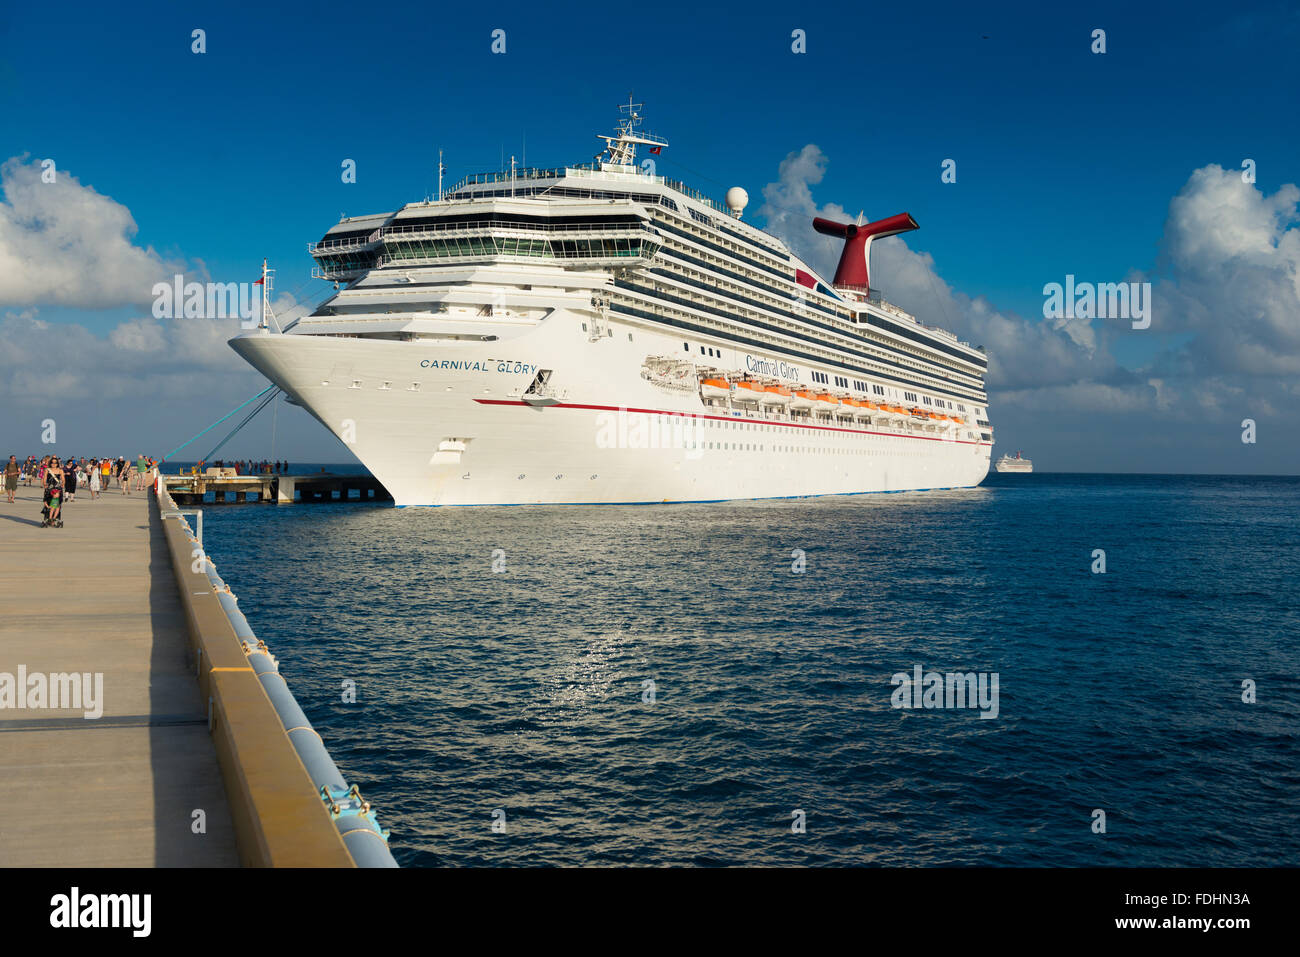 Carnival Glory Cruise Ship In Cozumel Port, Mexico Stock Photo